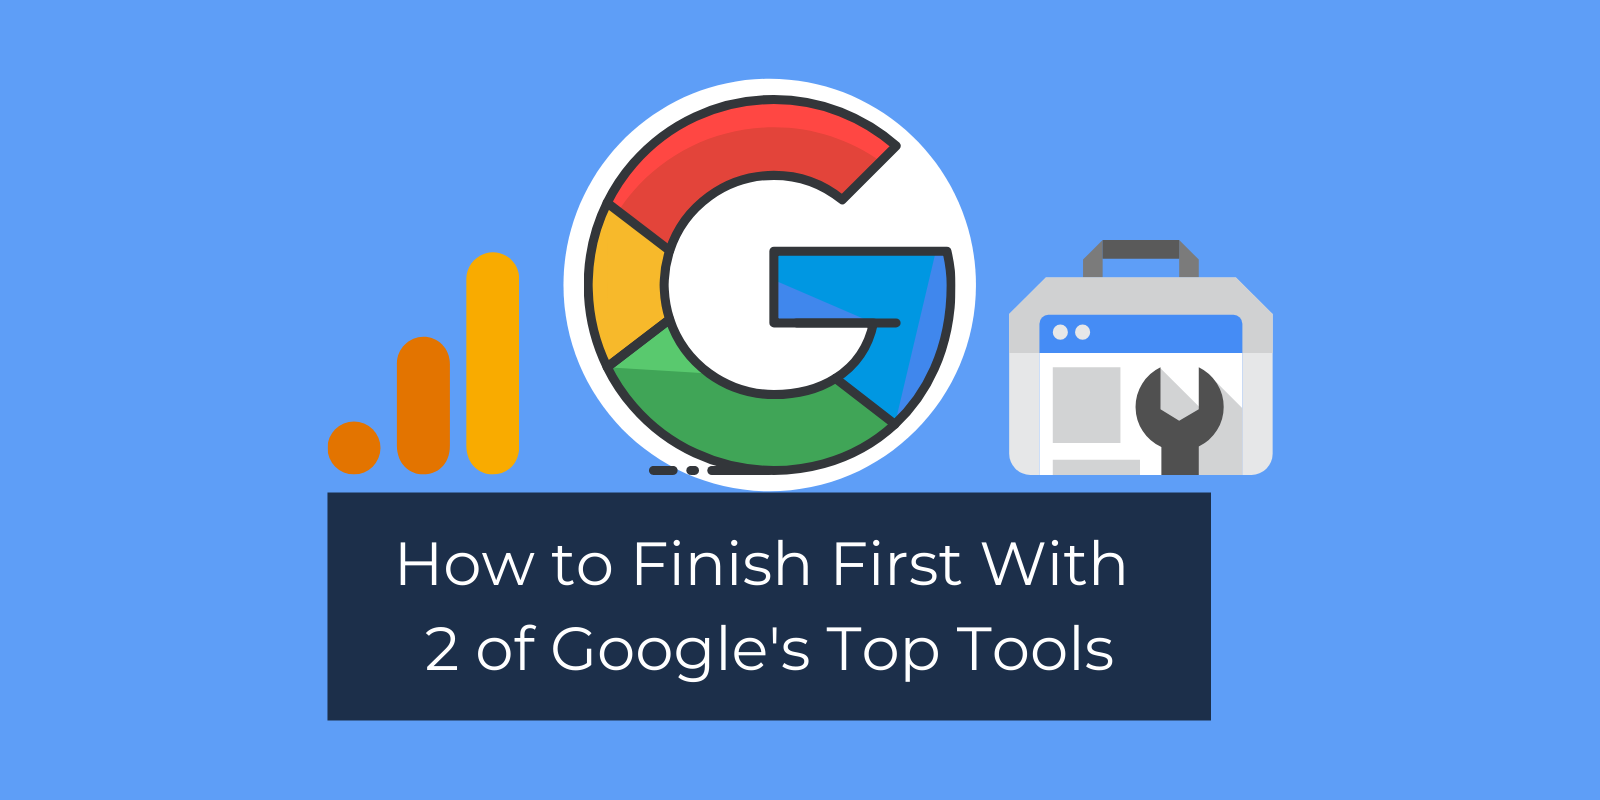 How to Finish First With 2 of Google's Top Tools